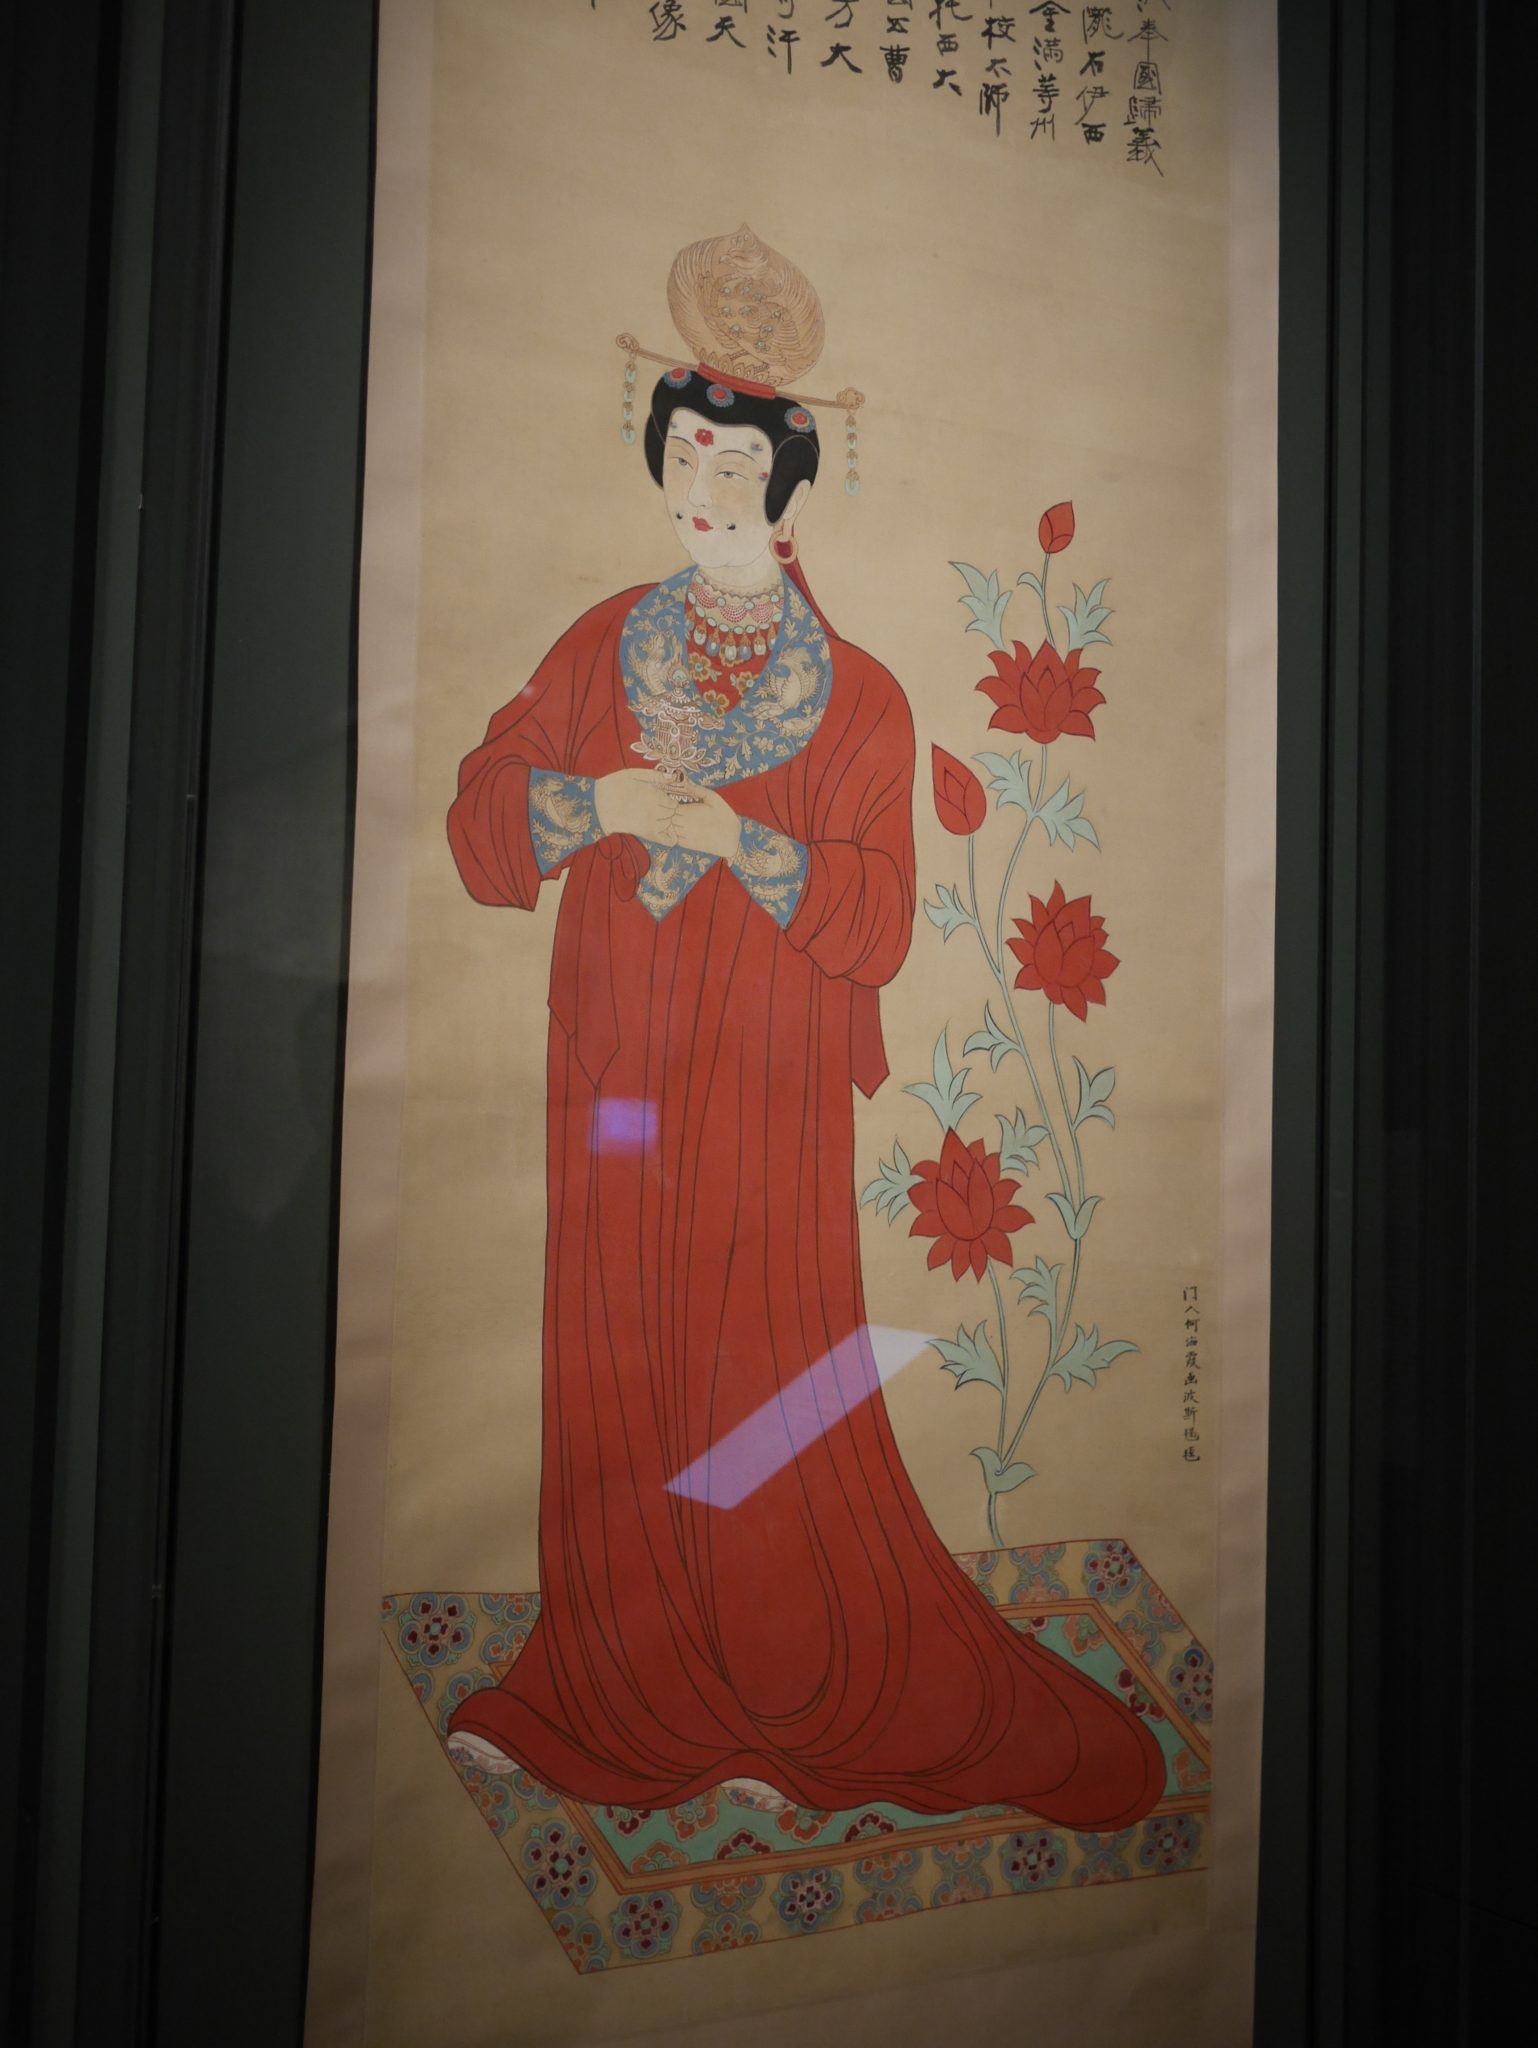 Parfum chine expo 8 rotated Perfume of China: the culture of incense in the time of the emperors to see at the Cernuschi Museum until August 26, 2018